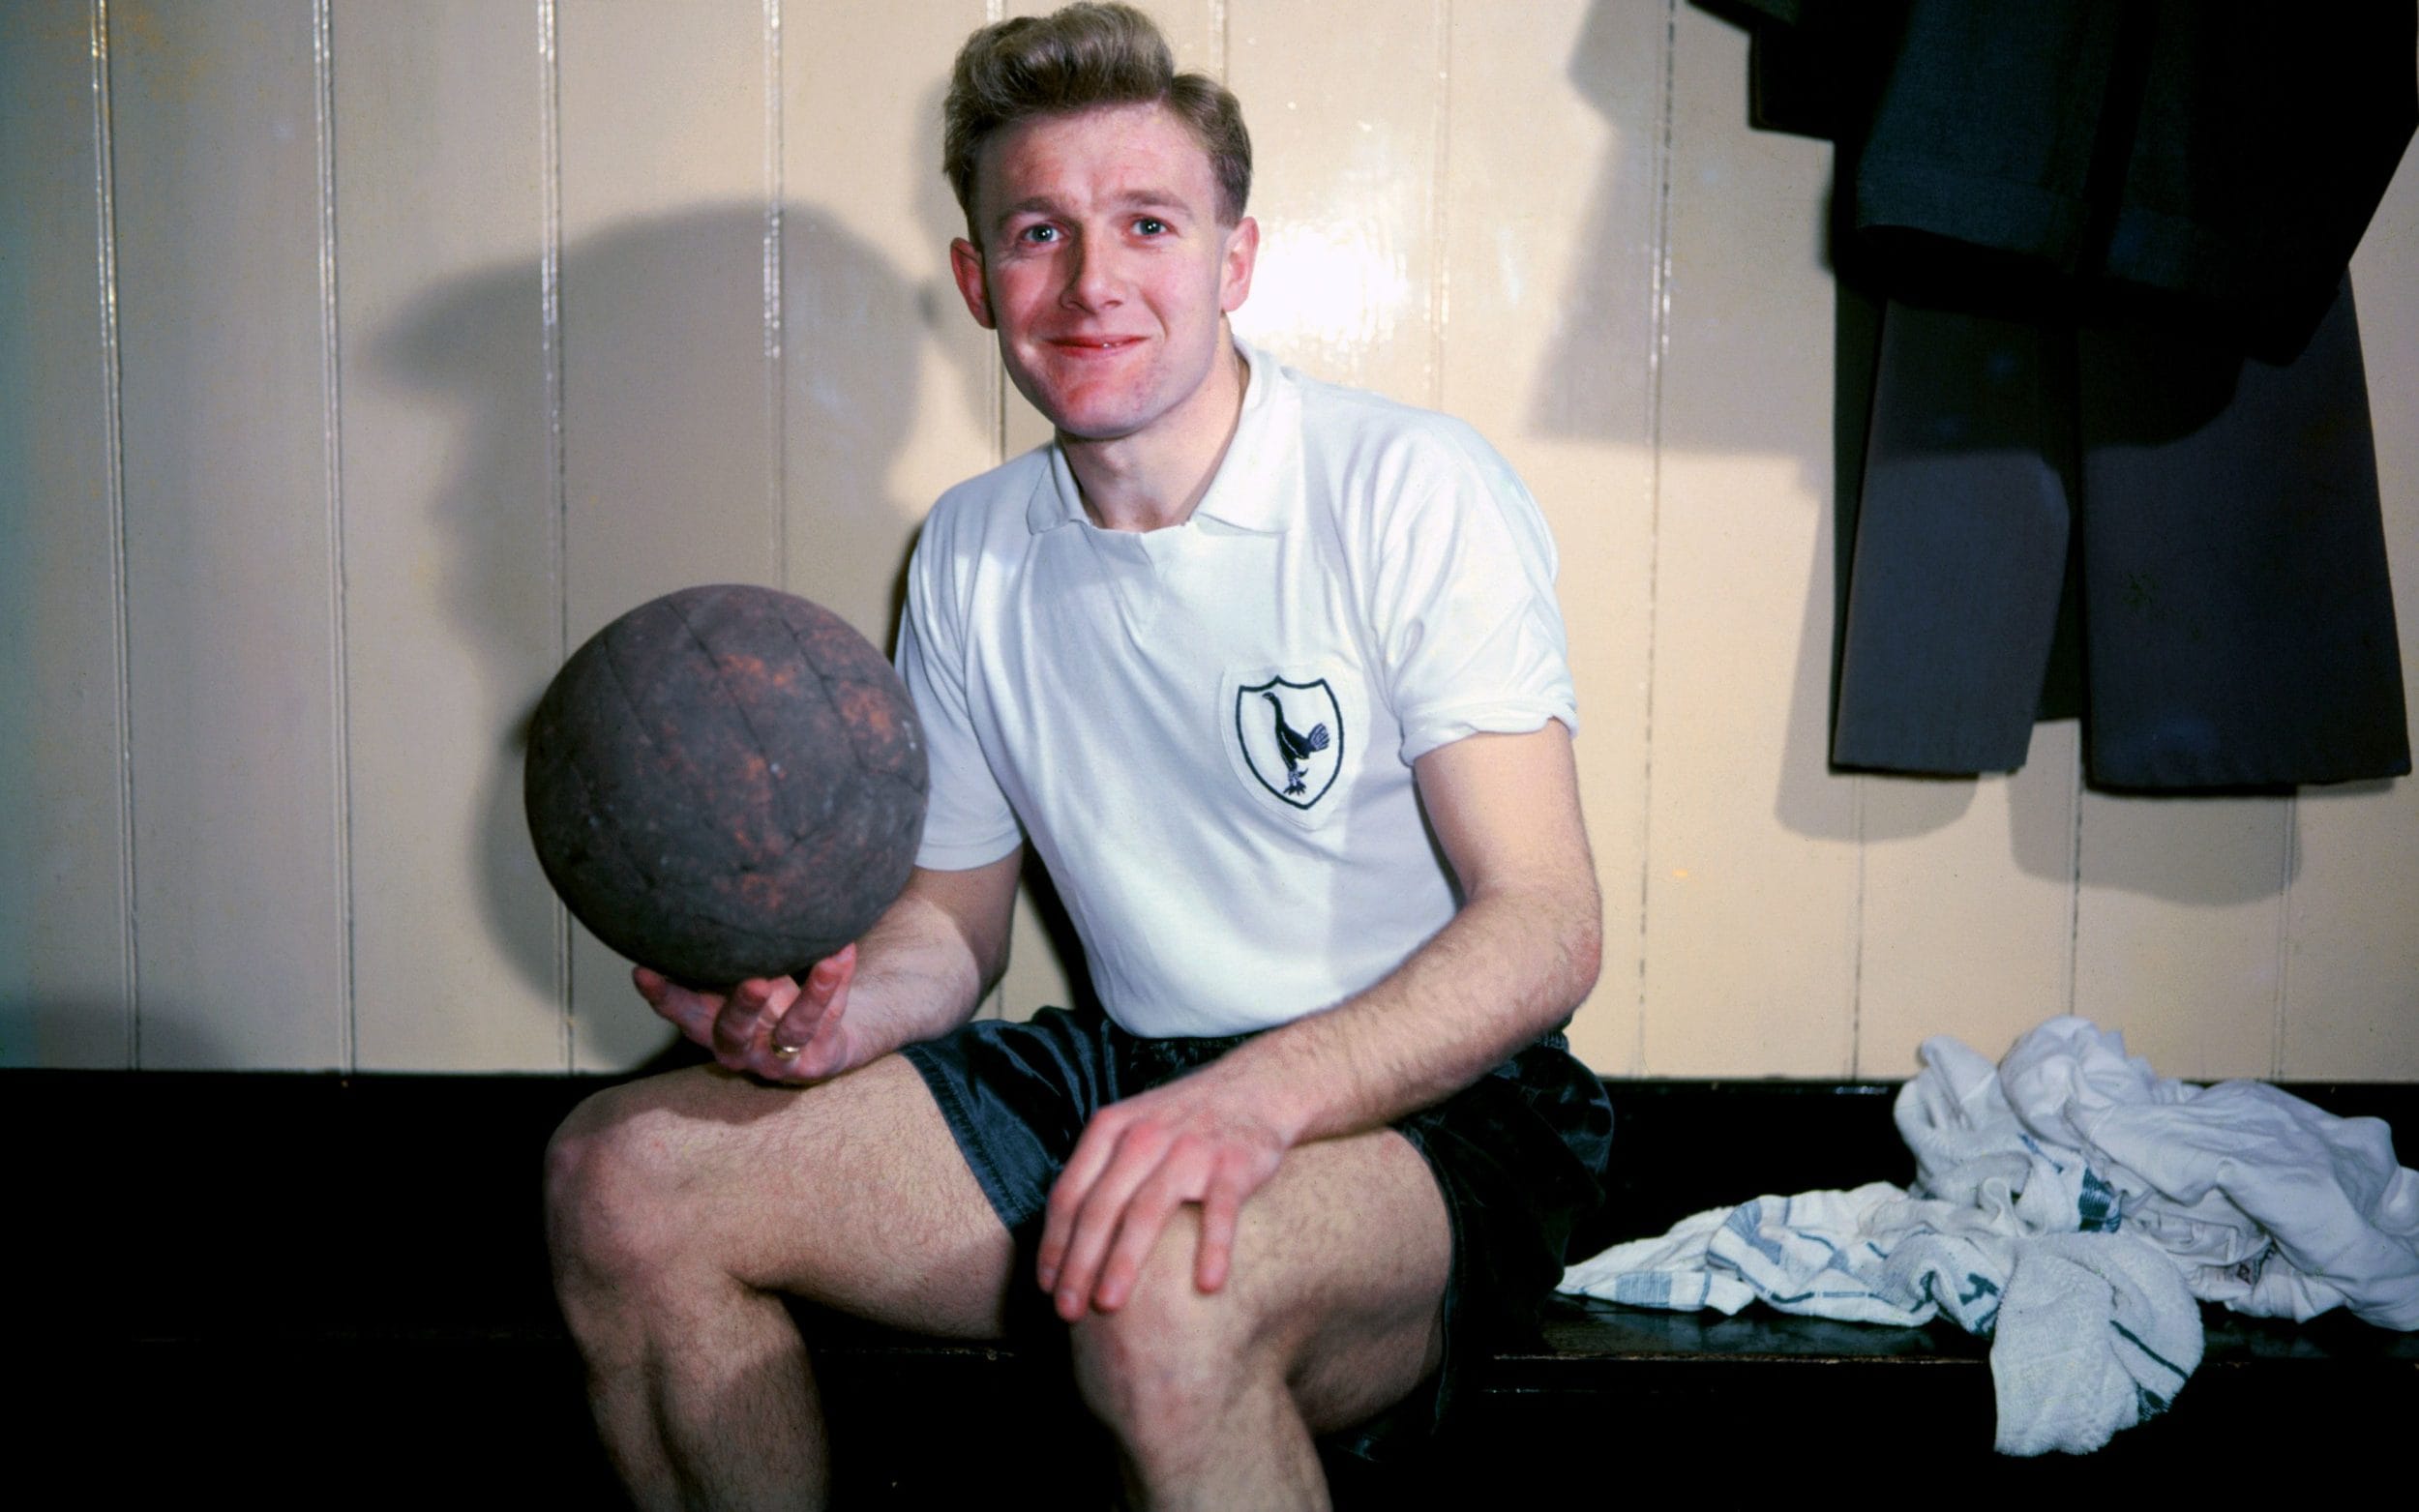 terry medwin, talented winger who won the league and cup double with spurs – obituary